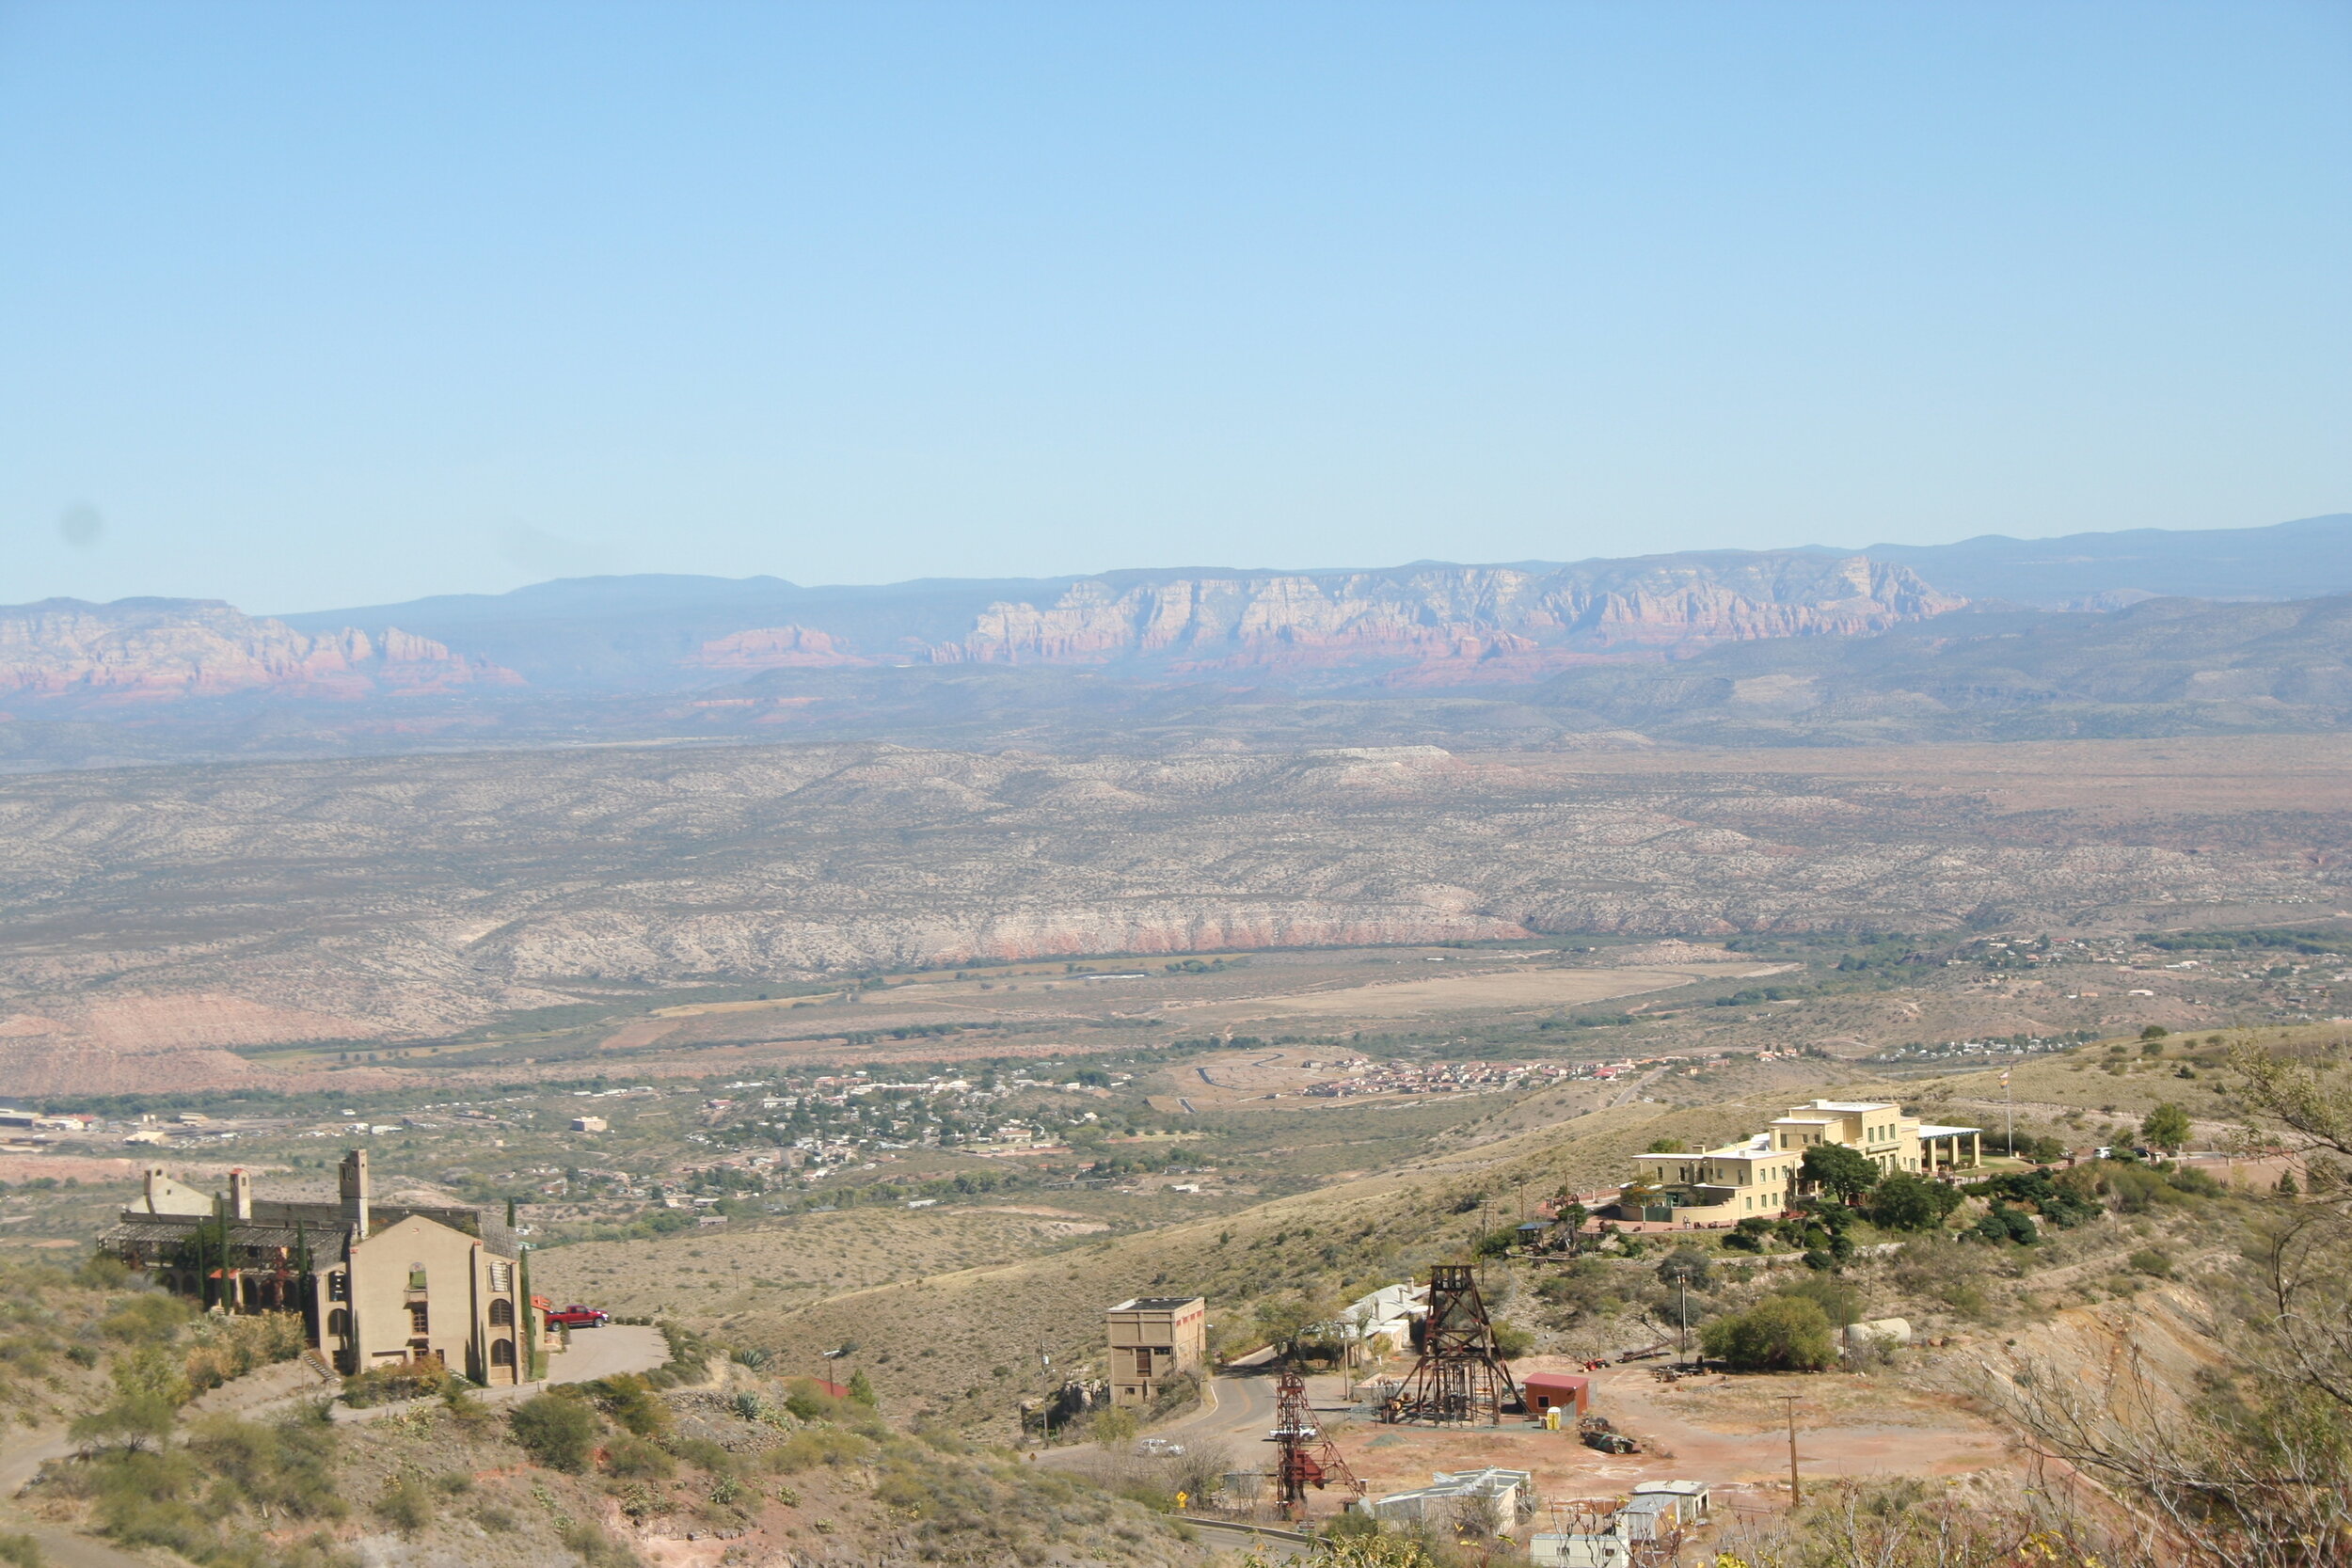   A view of Jerome overlooking the Verde Valley.  